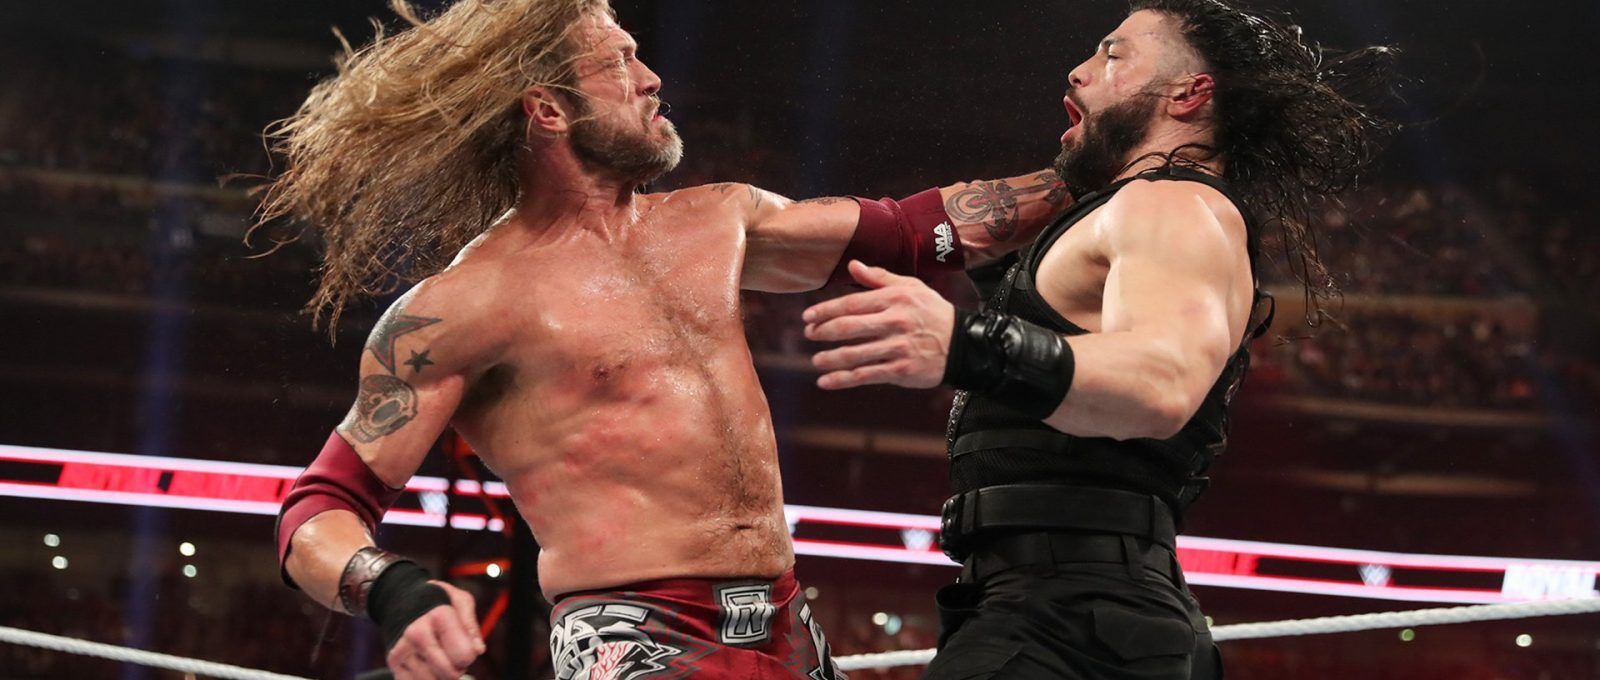 DEADLOCK Podcast: WWE Royal Rumble 2020 Post Show, Edge Returns To